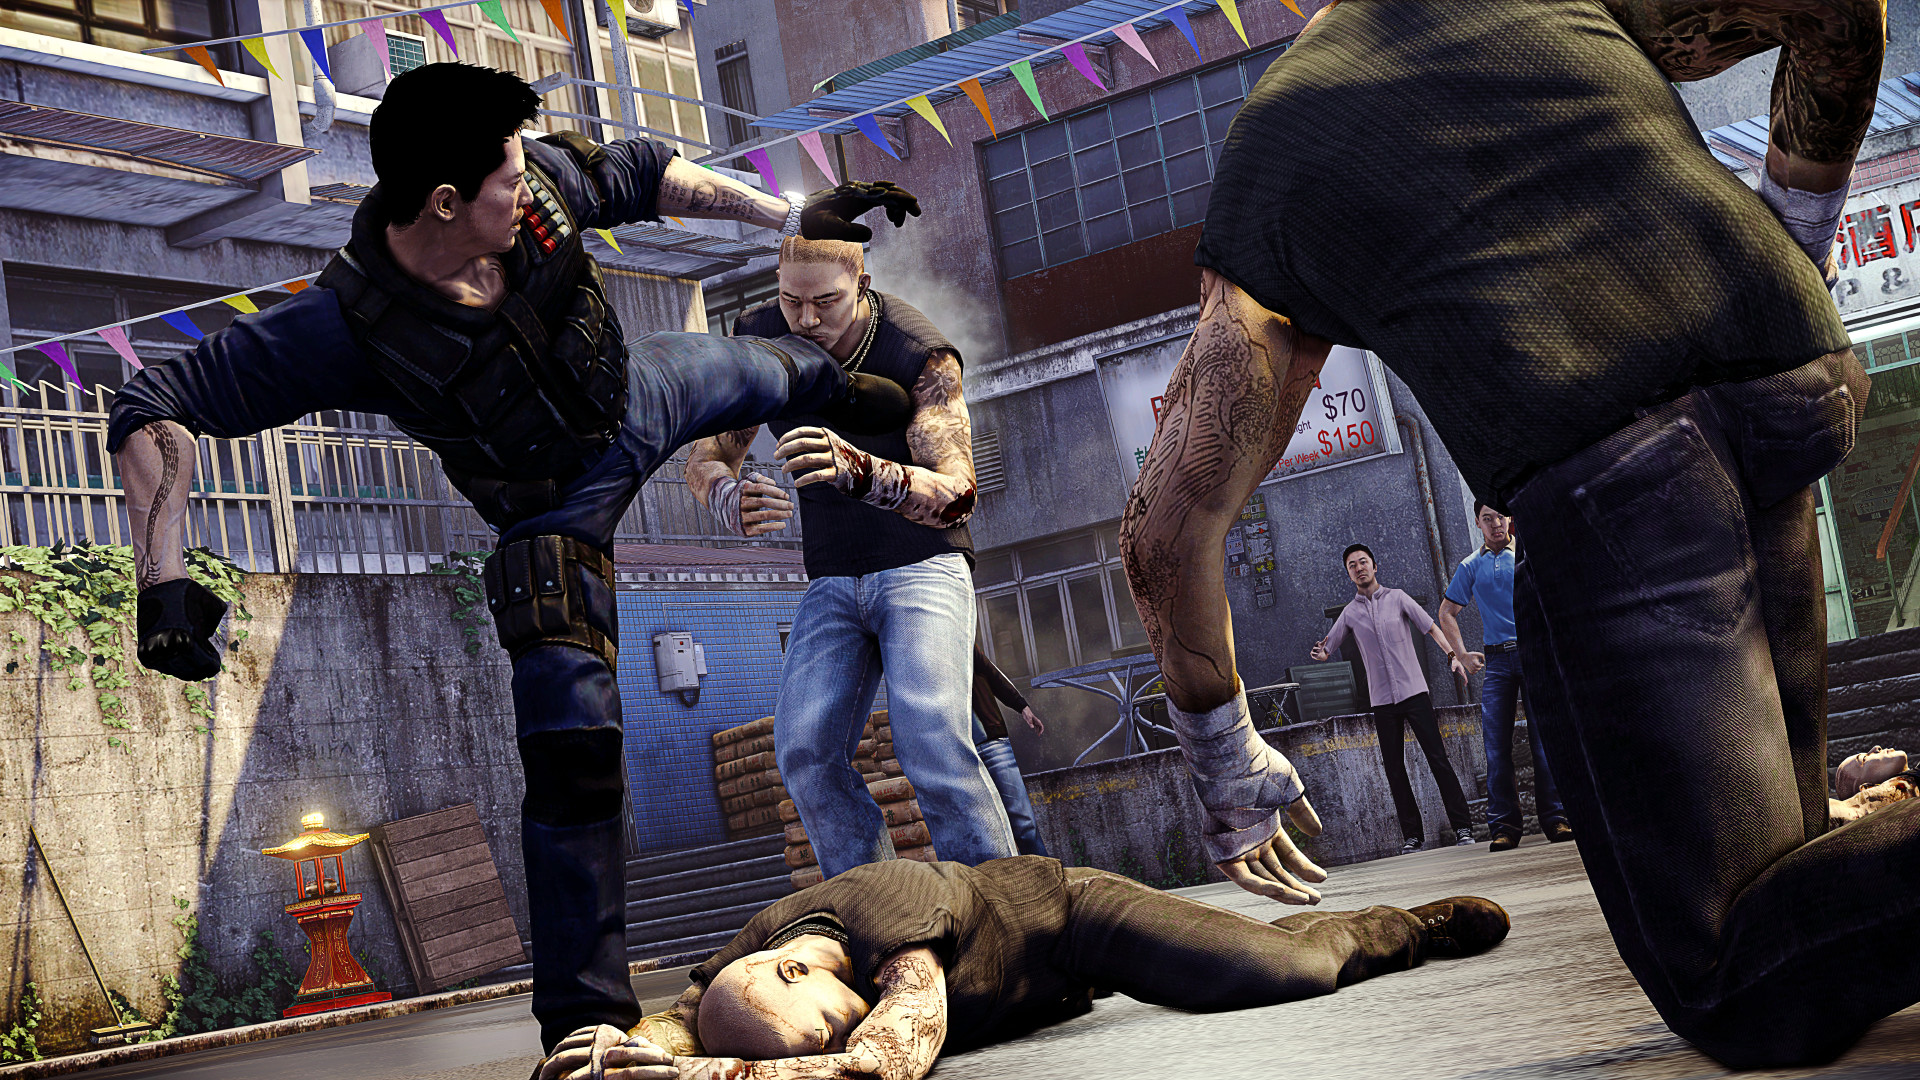 sleeping dogs definitive edition pc screen tearing